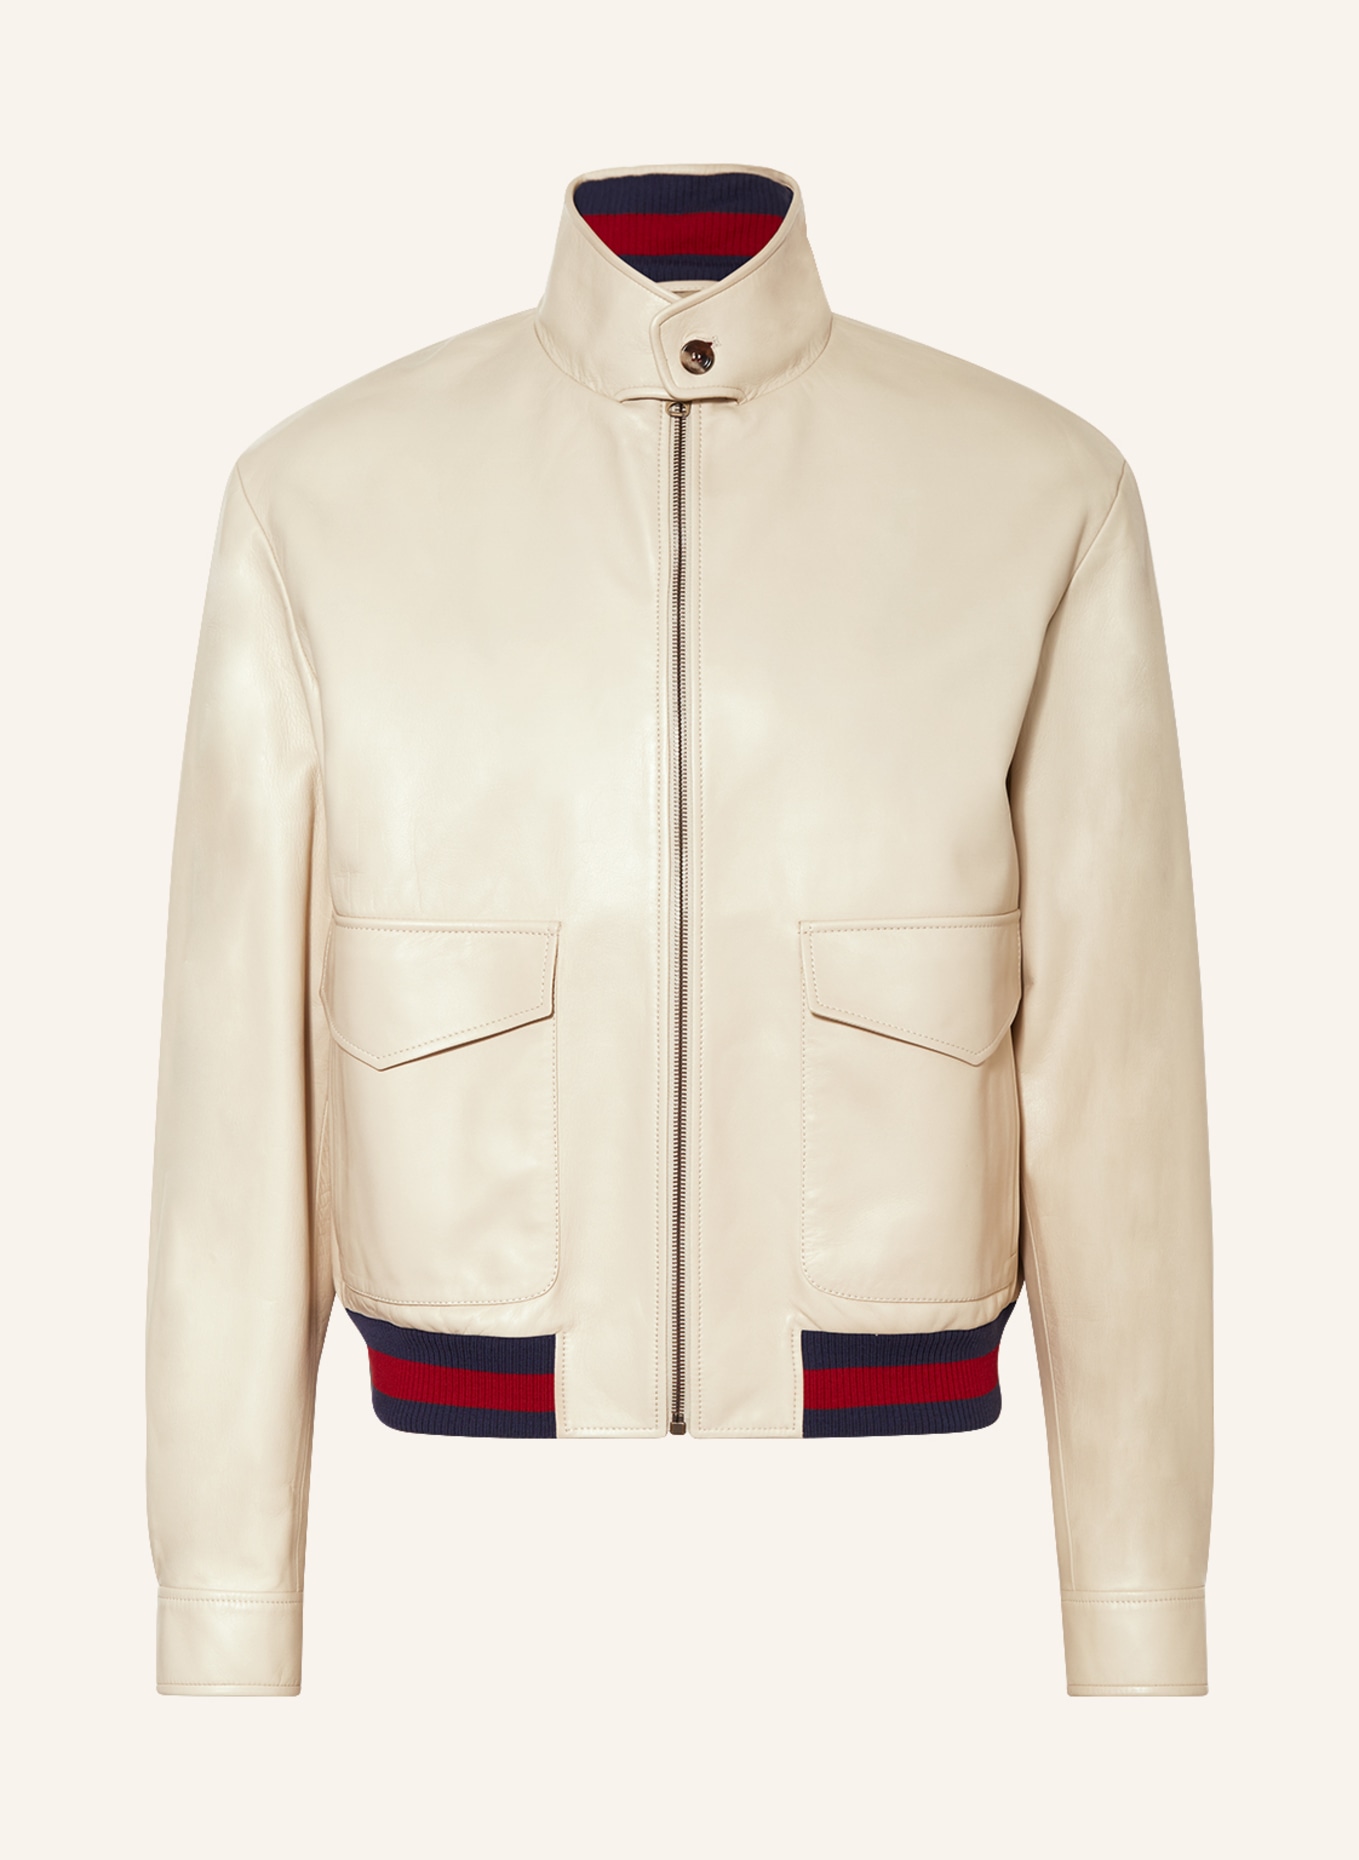 champion Aftensmad Station GUCCI Leather jacket in cream/ dark red/ blue